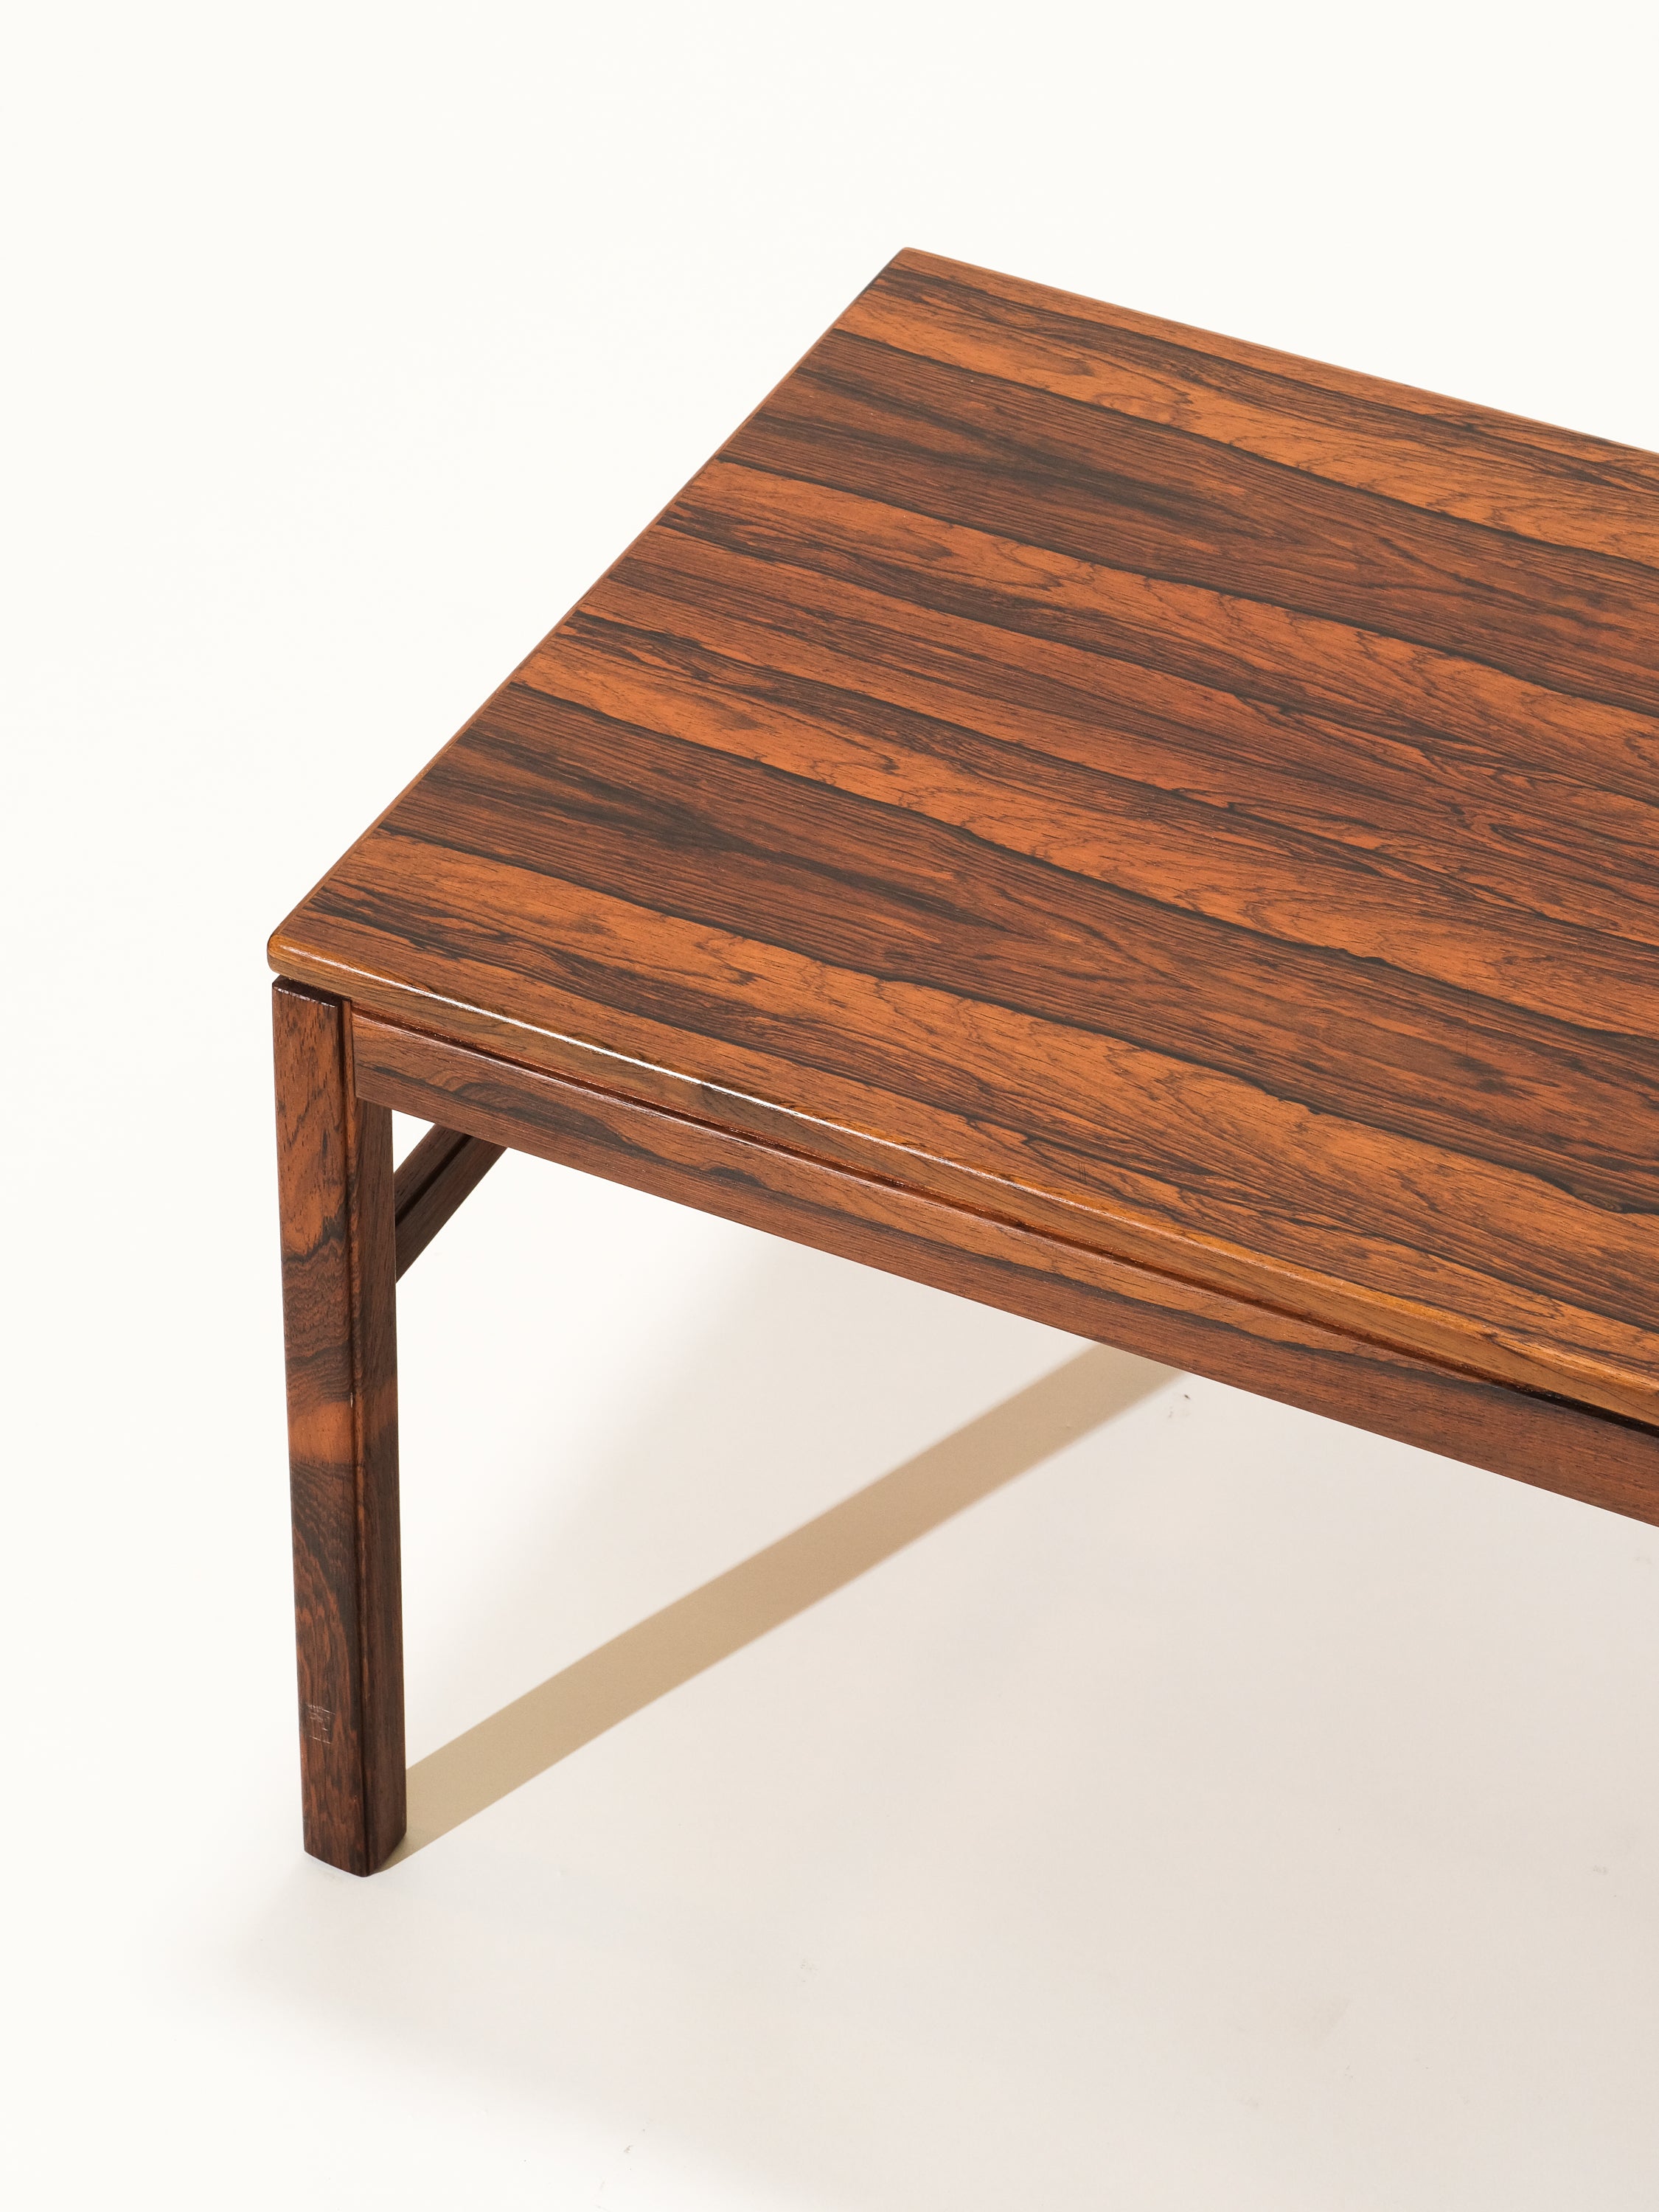 Bench / Side Table Model "Casino" in Rosewood by Engström & Myrstrand, 1960s